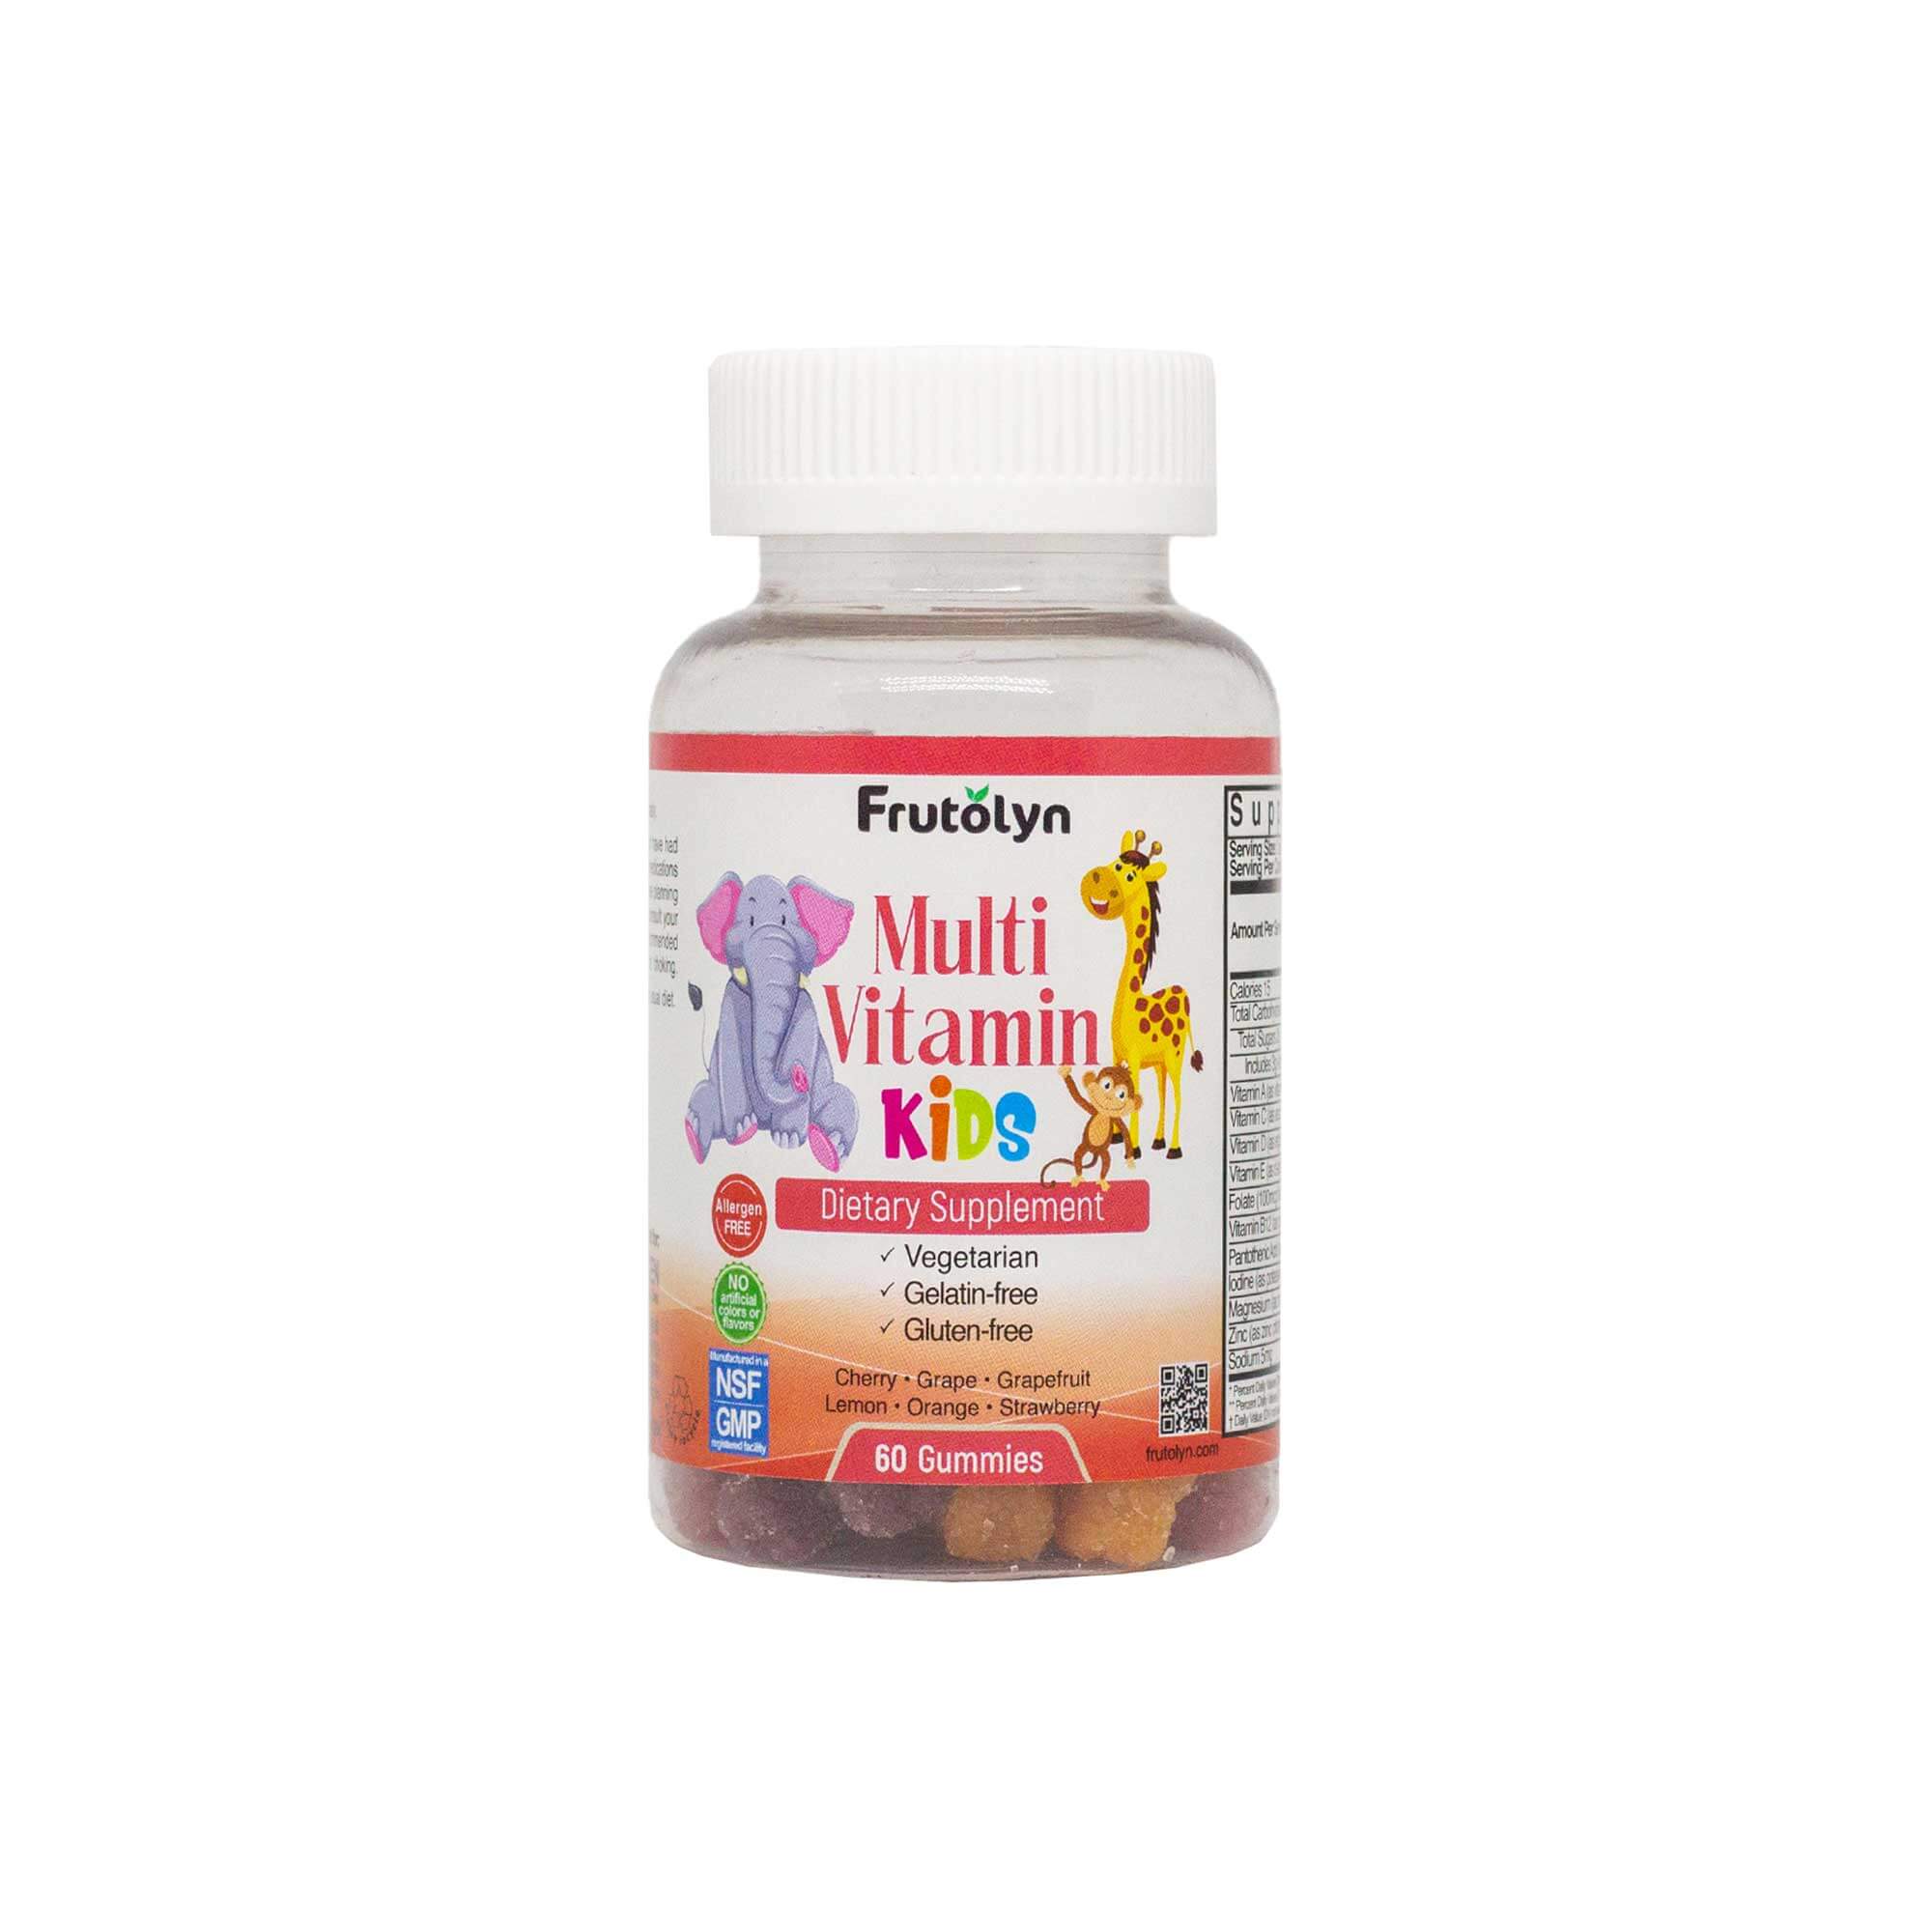 Frutolyn Multivitamins Kids gummy bottle (products page)